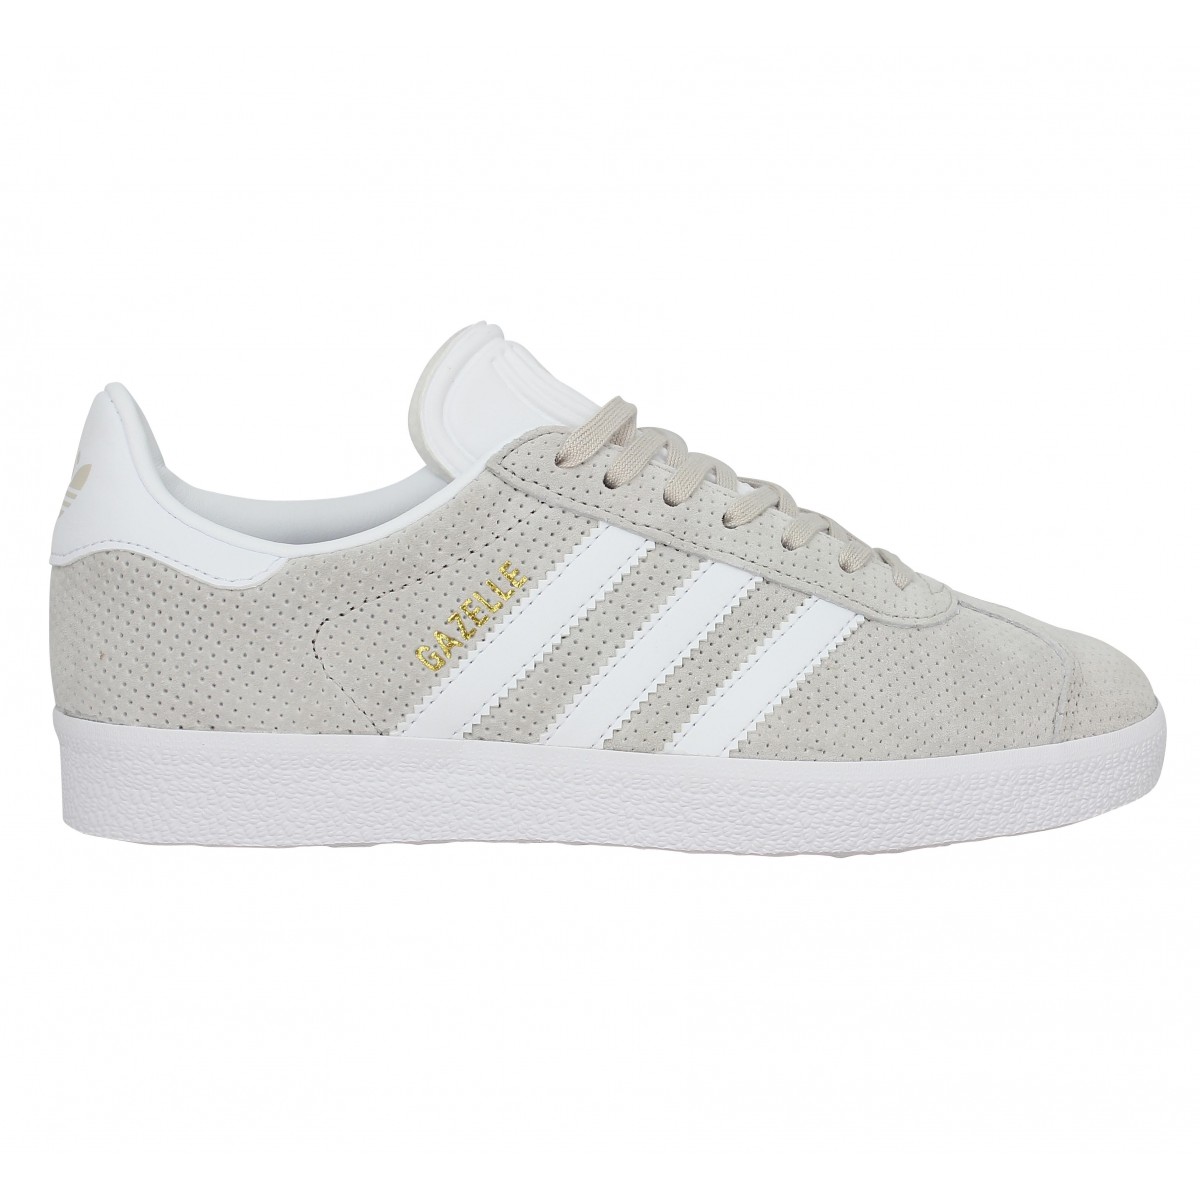 Chaussures Adidas gazelle velours perfo 